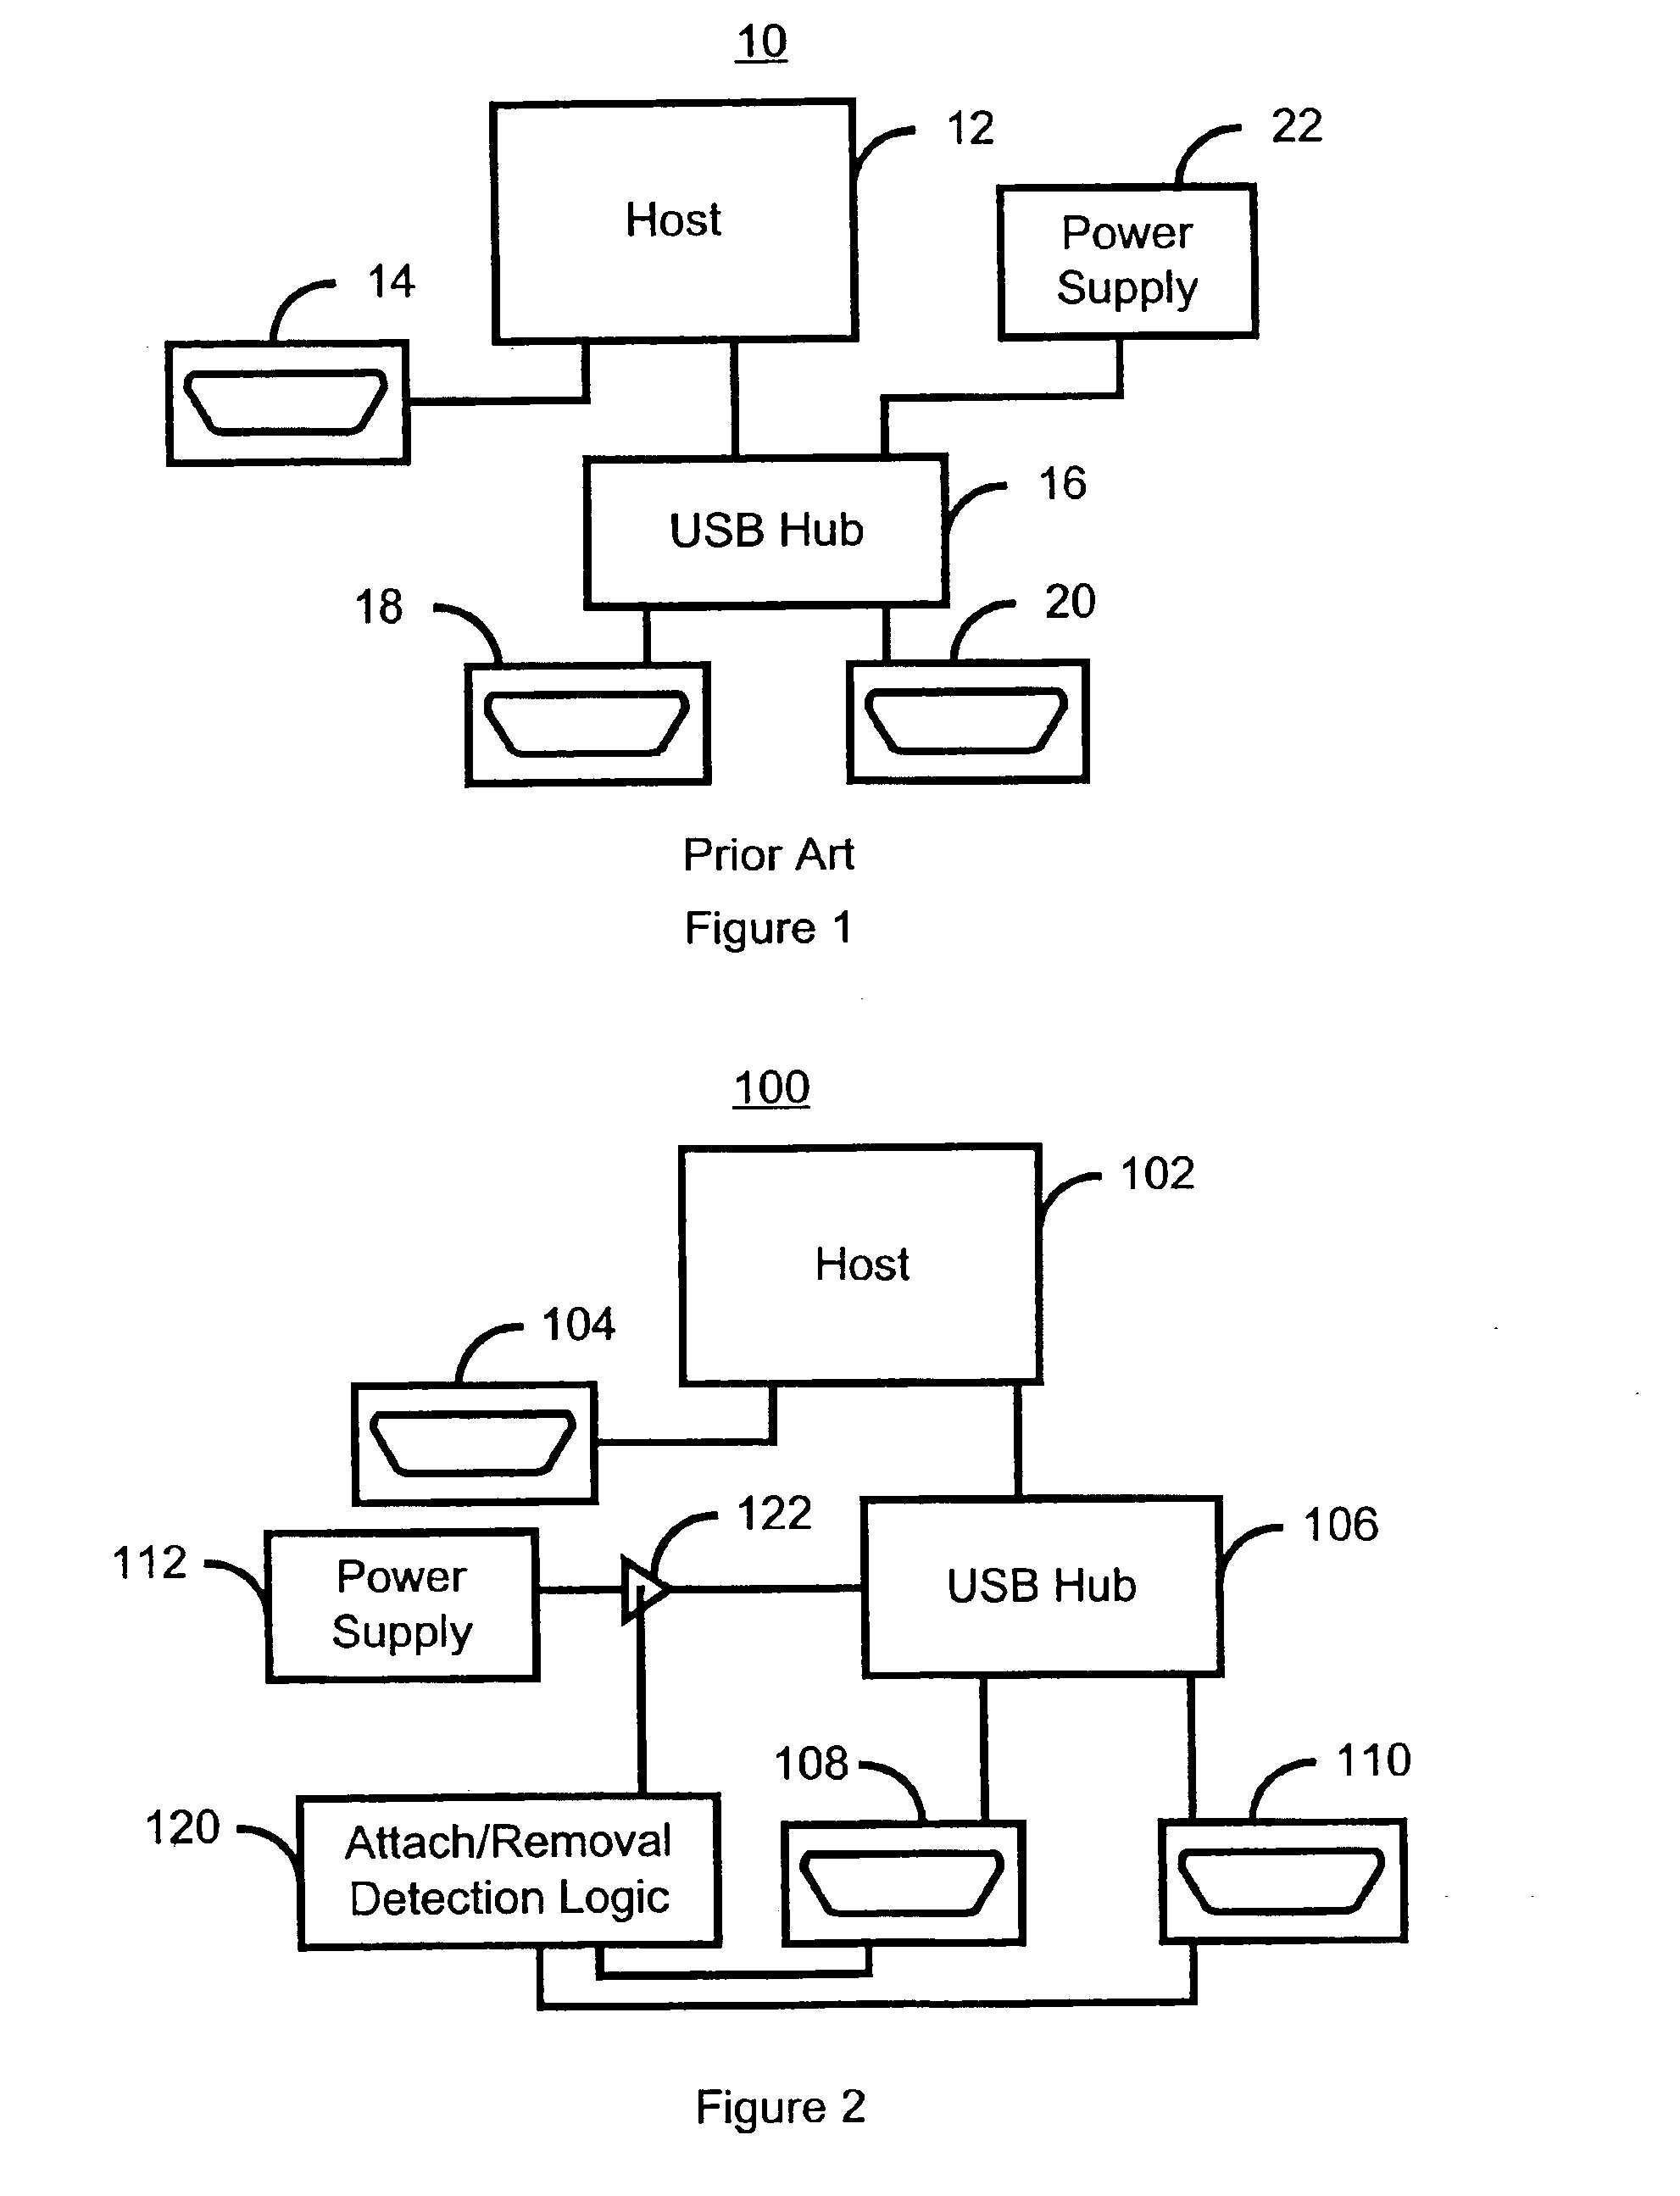 Method and system for managing power in a system having an internal USB HUB